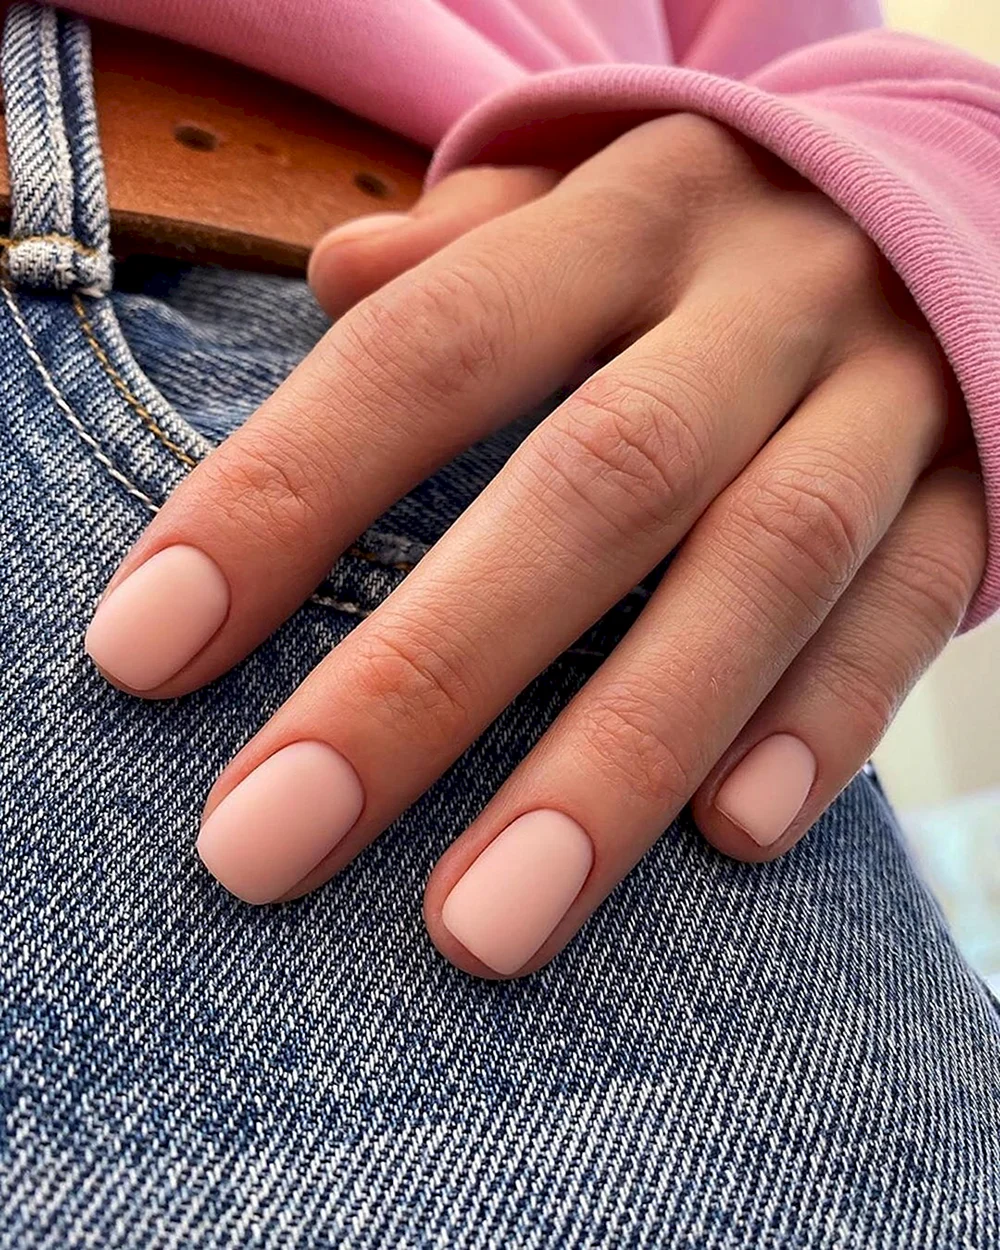 Weak and Soft Nails